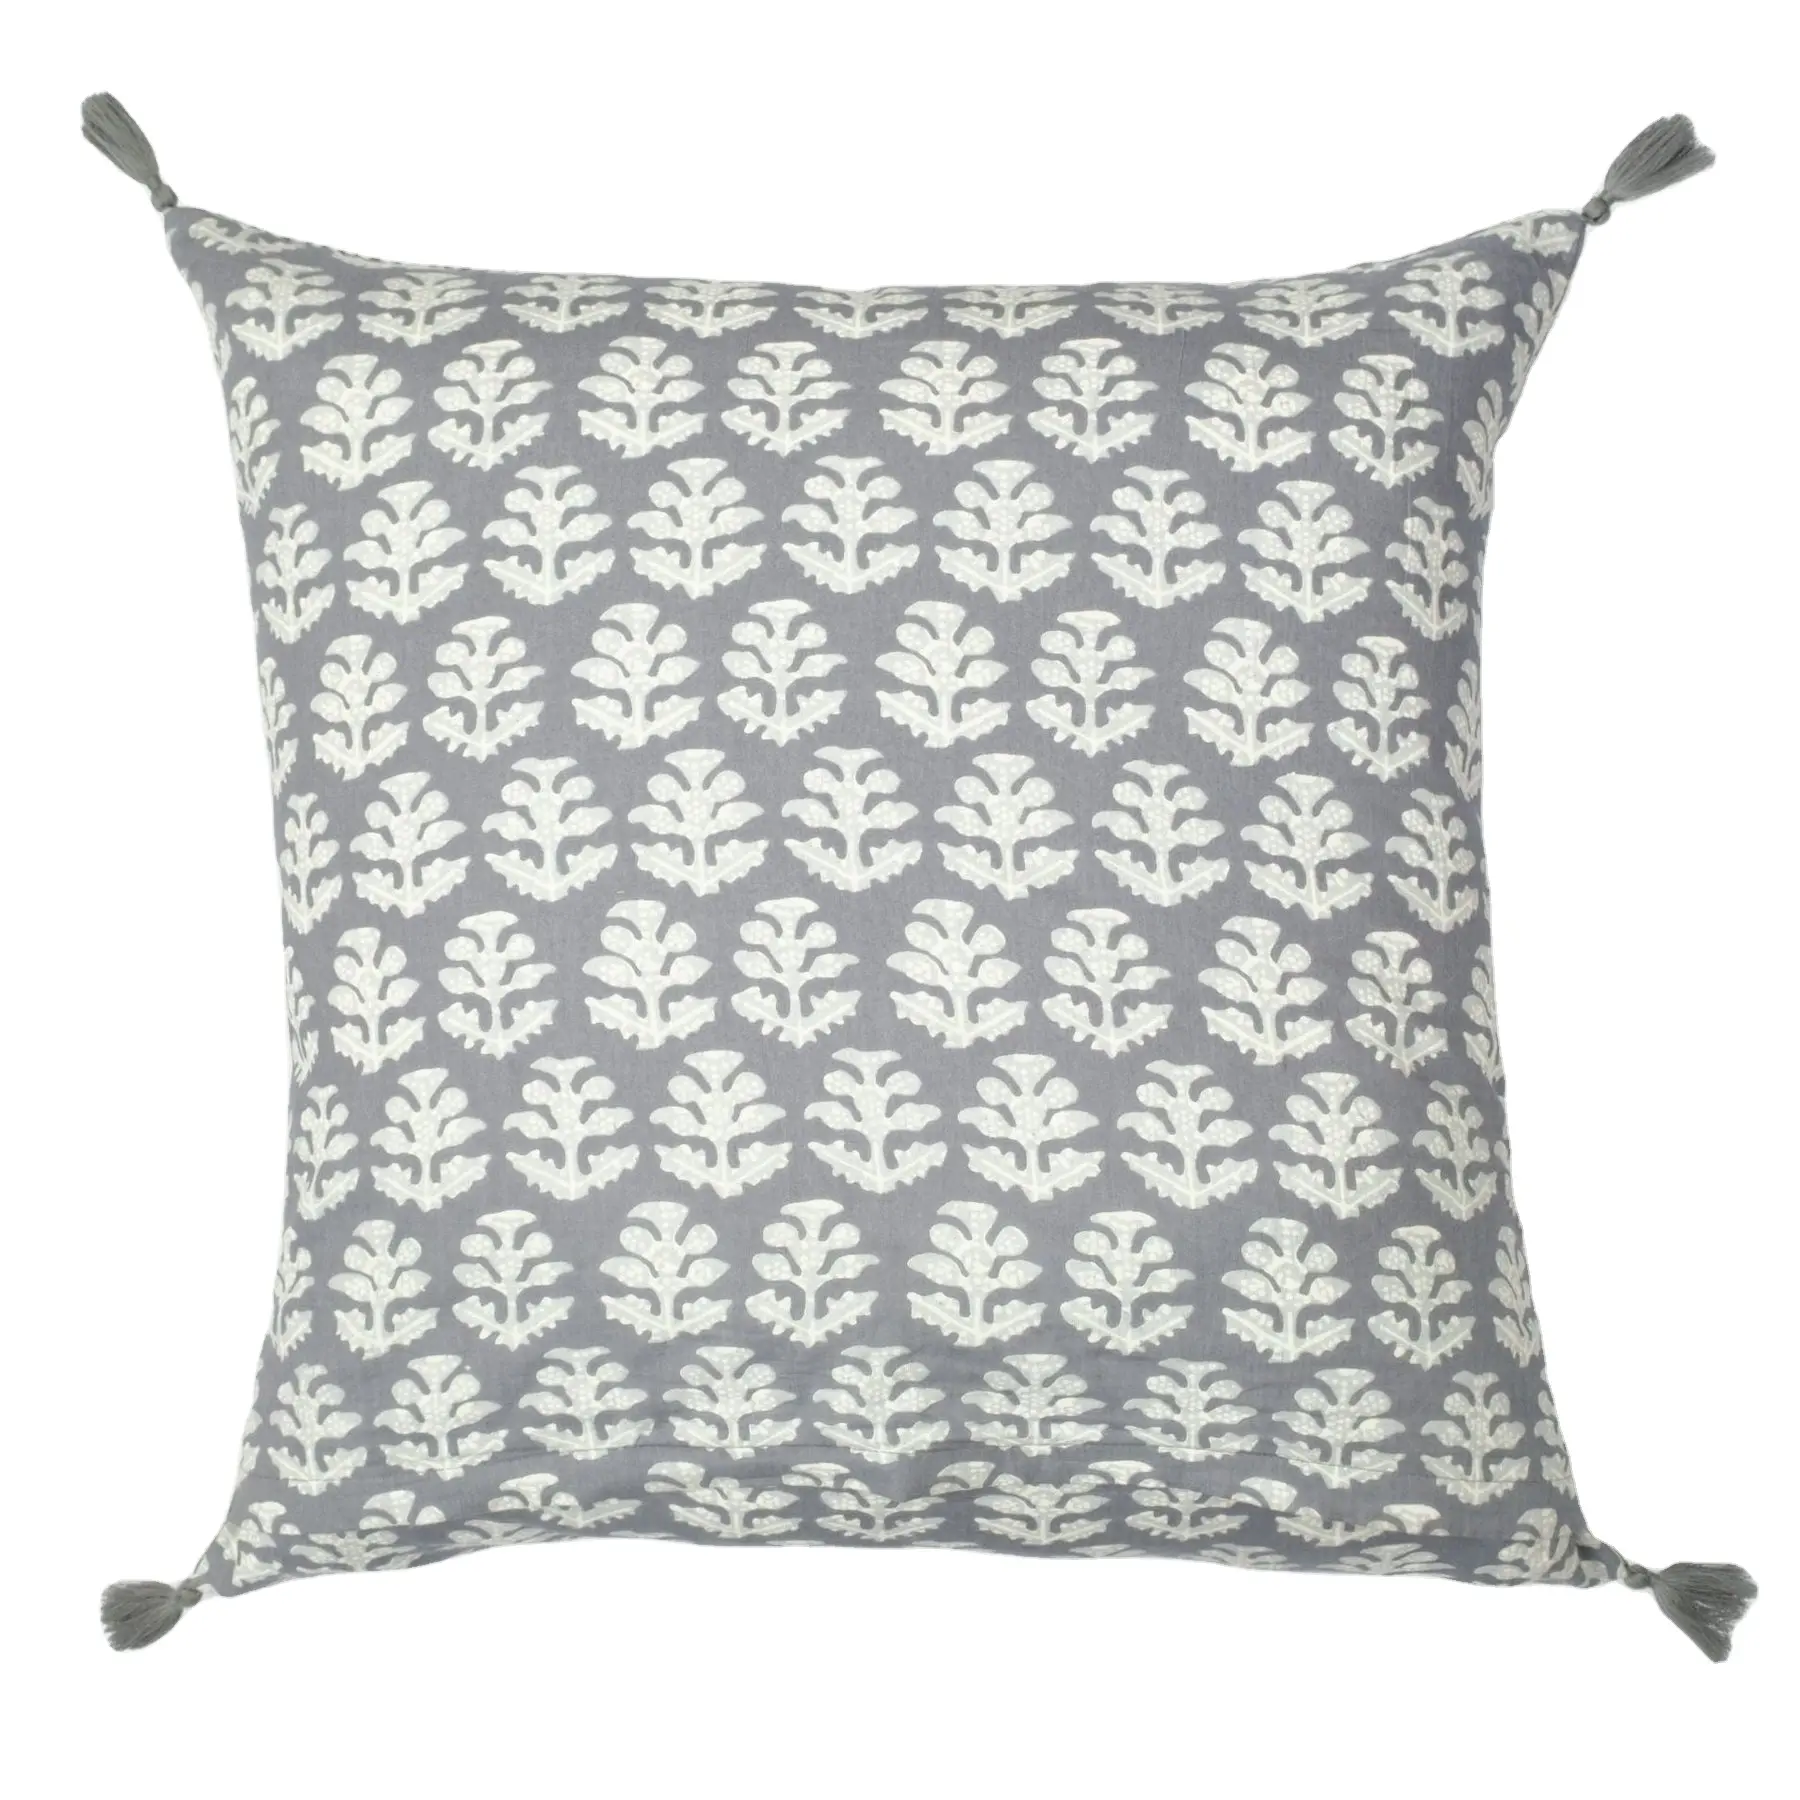 New Trending Grey Embroidered Cushion Cover